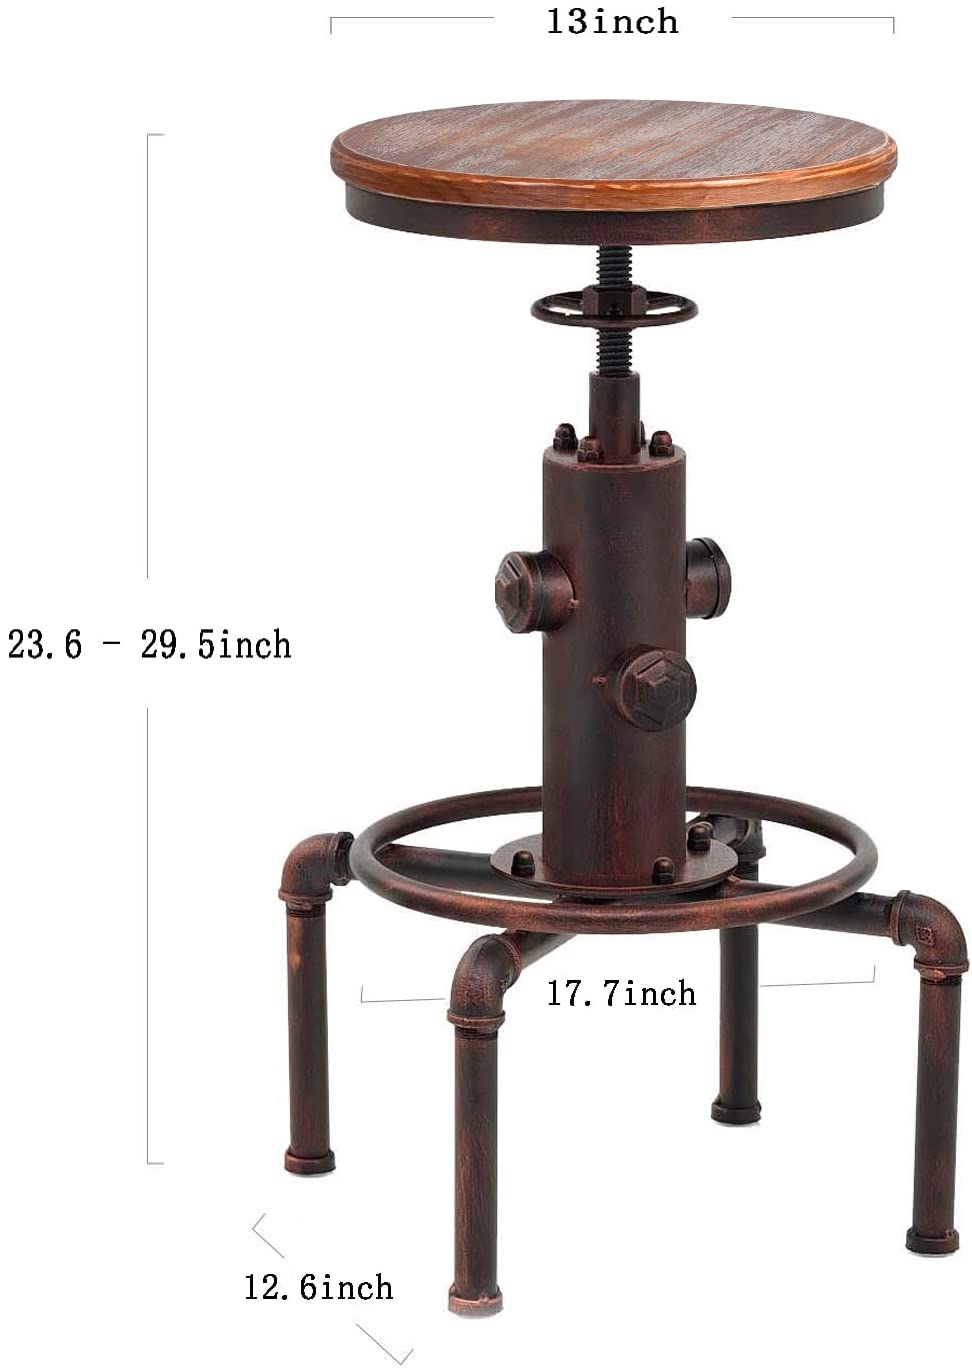 American Antique Vintage Industrial Barstool Solid Wood Water Pipe Fire Hydrant Design Cafe Coffee Industrial Bar Stool Set of 2